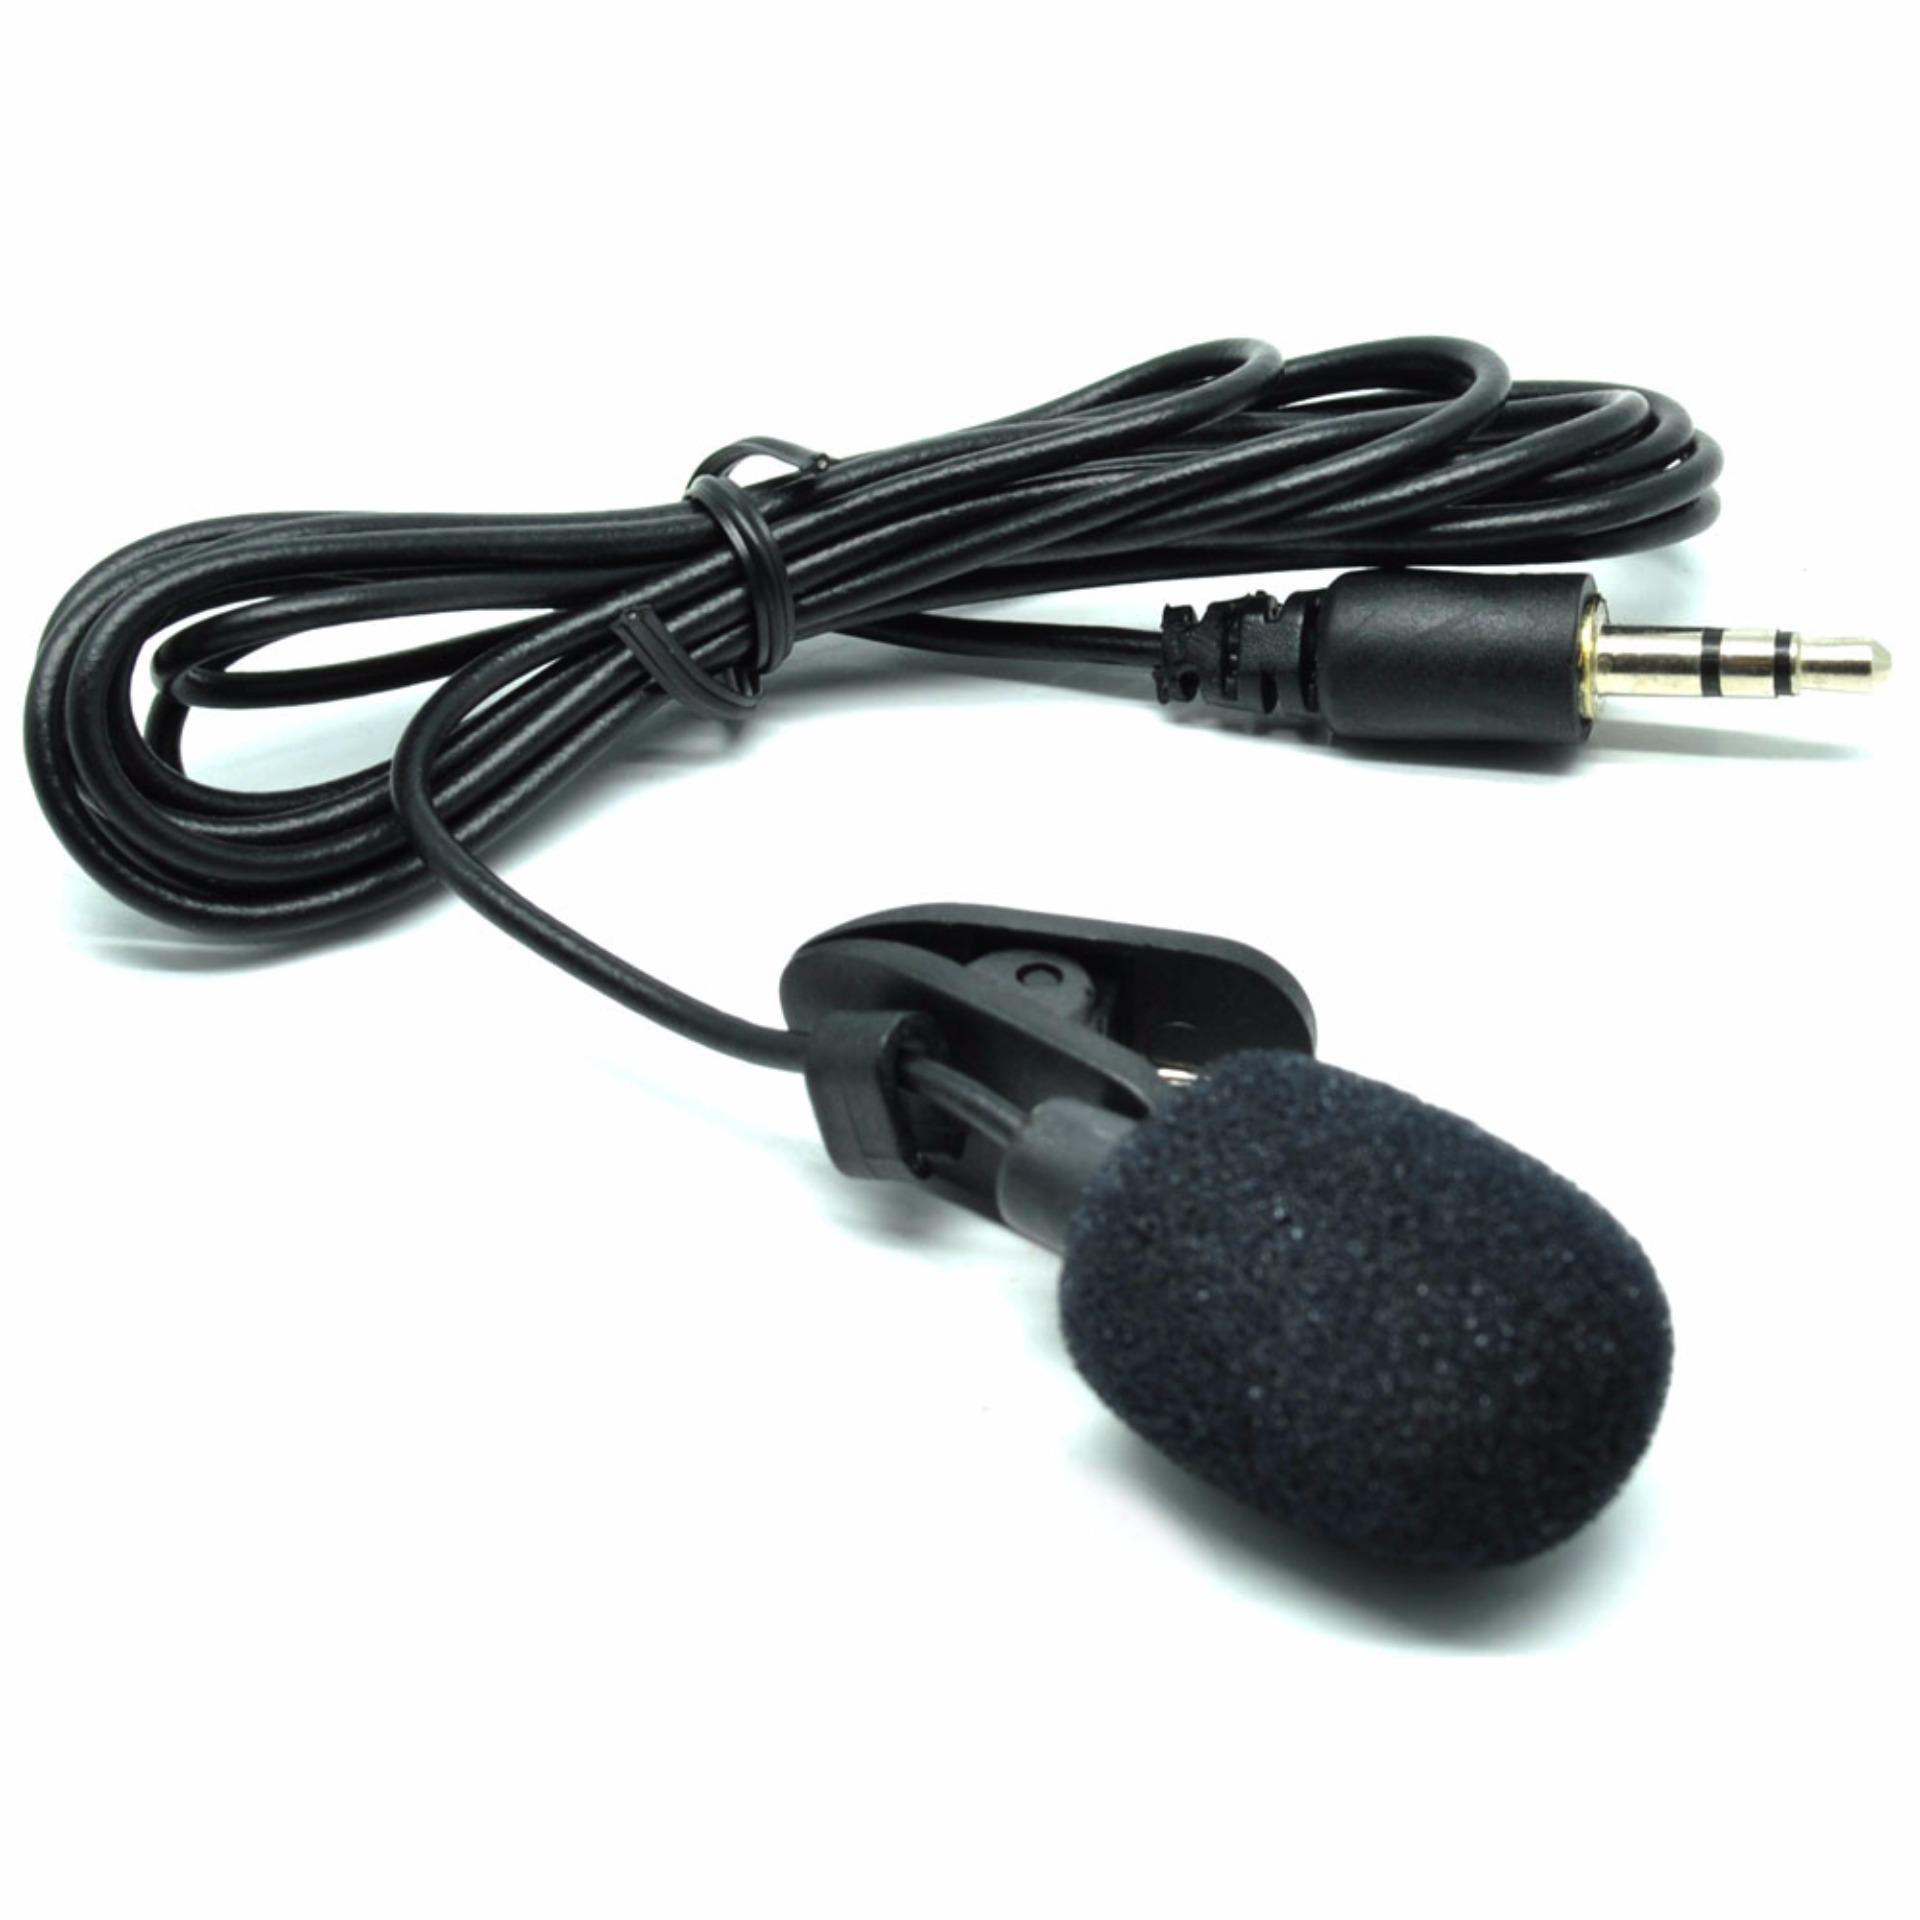 Microphone with Clip for Smartphone / Laptop / Tablet PC - Black